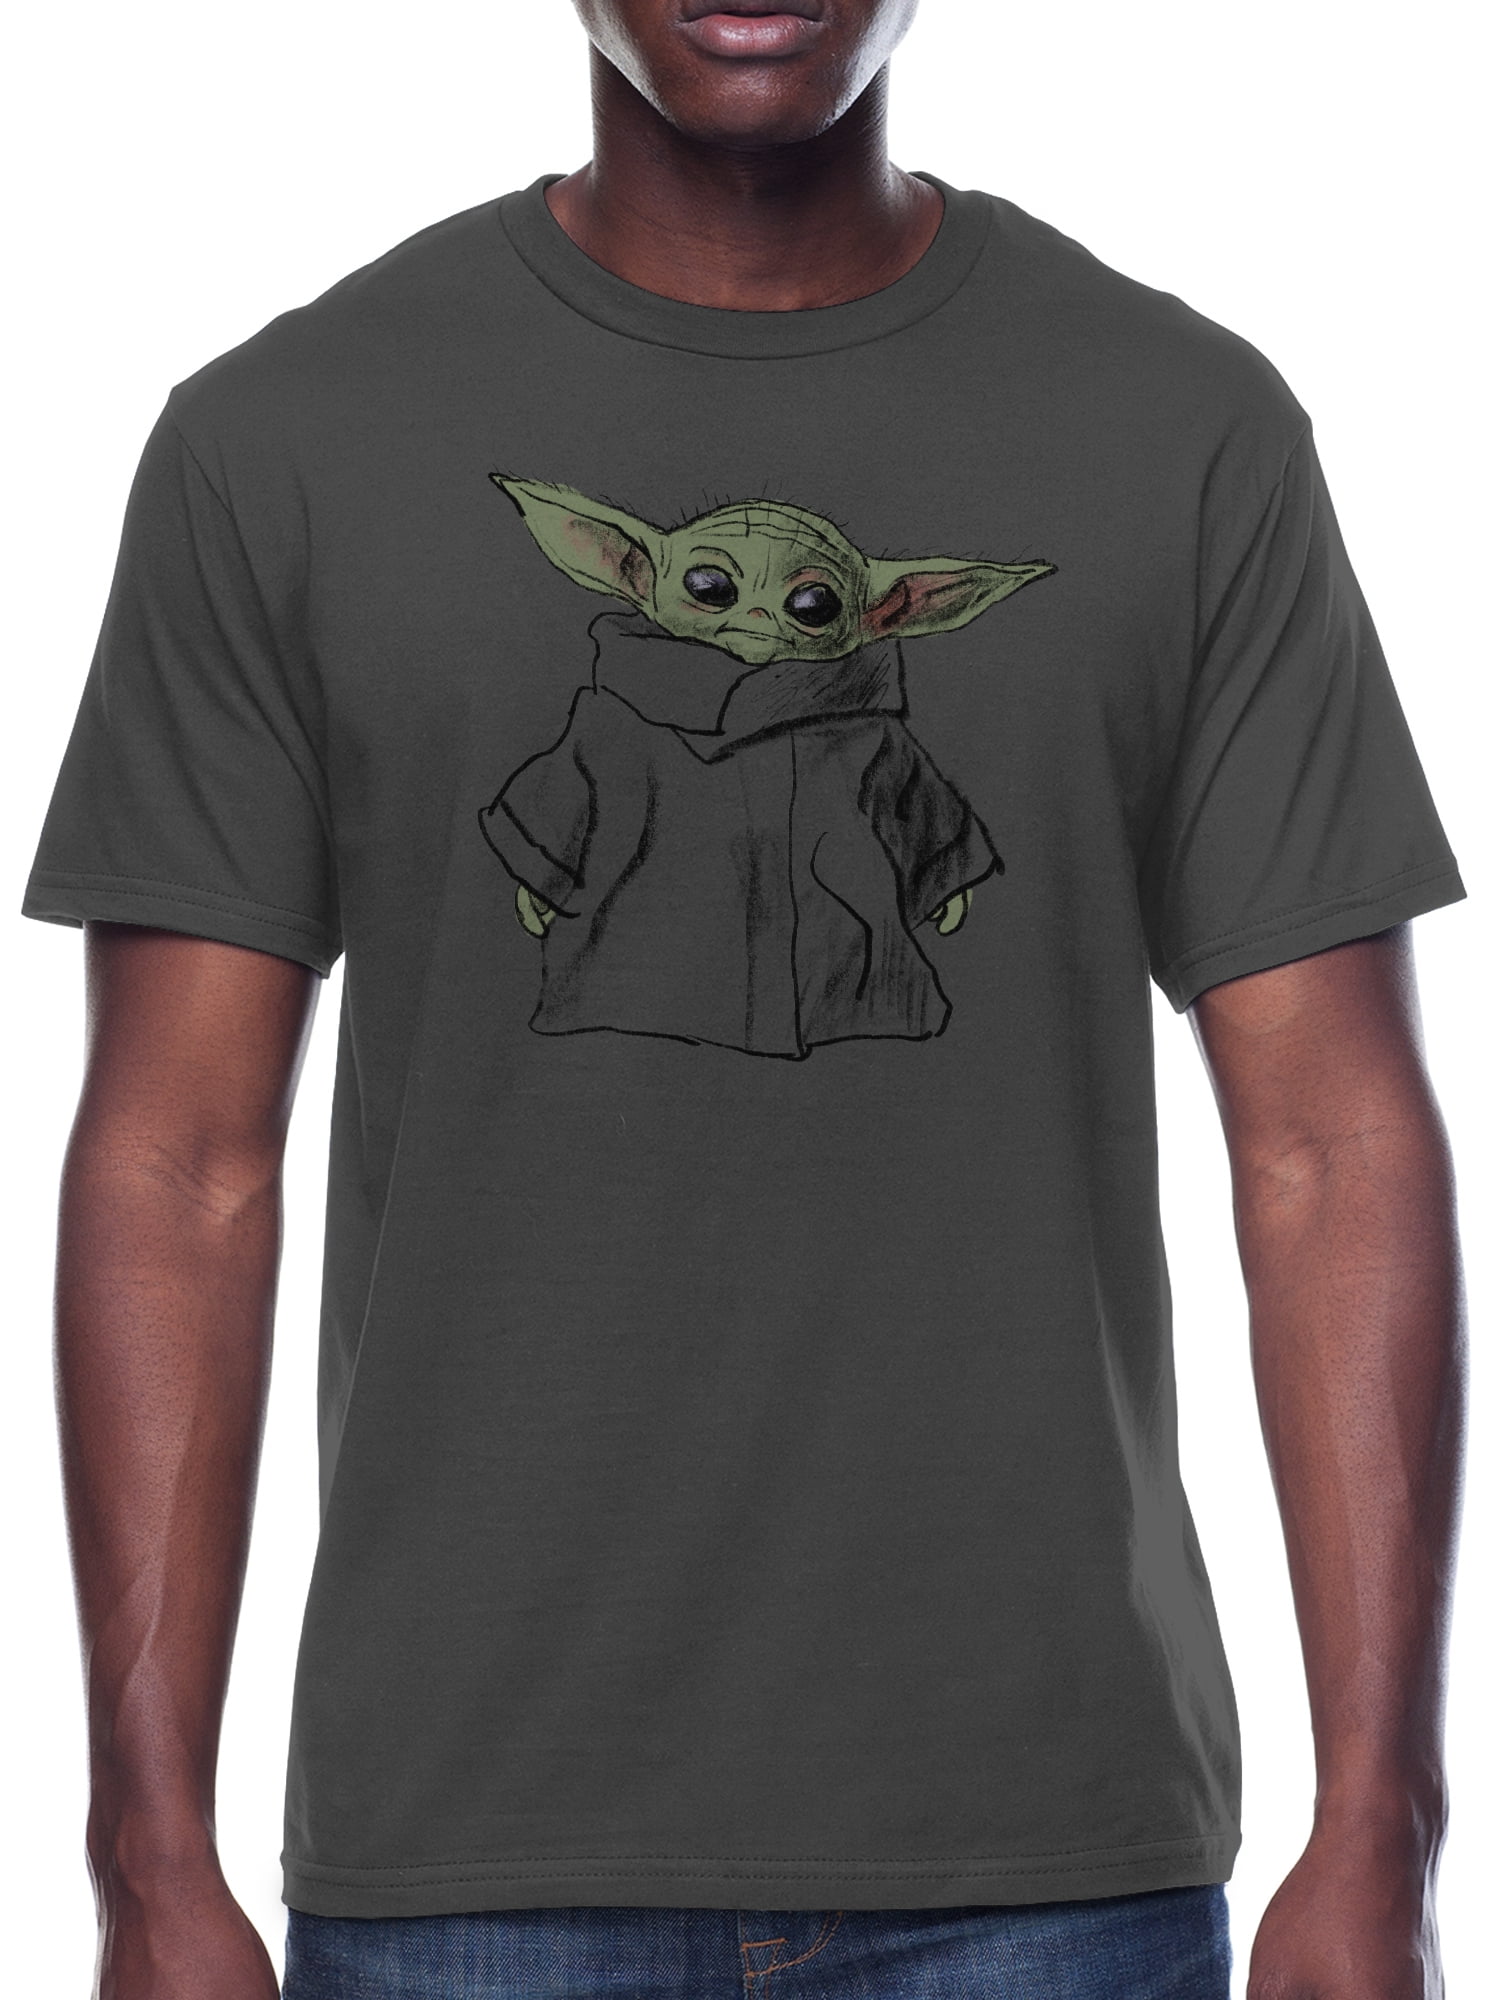 S-XXL for Home or Gym Official Merchandise Star Wars The Mandalorian Distressed Mythosaur Mens T-Shirt Baby Yoda Crew Neck Graphic Tee Birthday Gift Idea for Guys